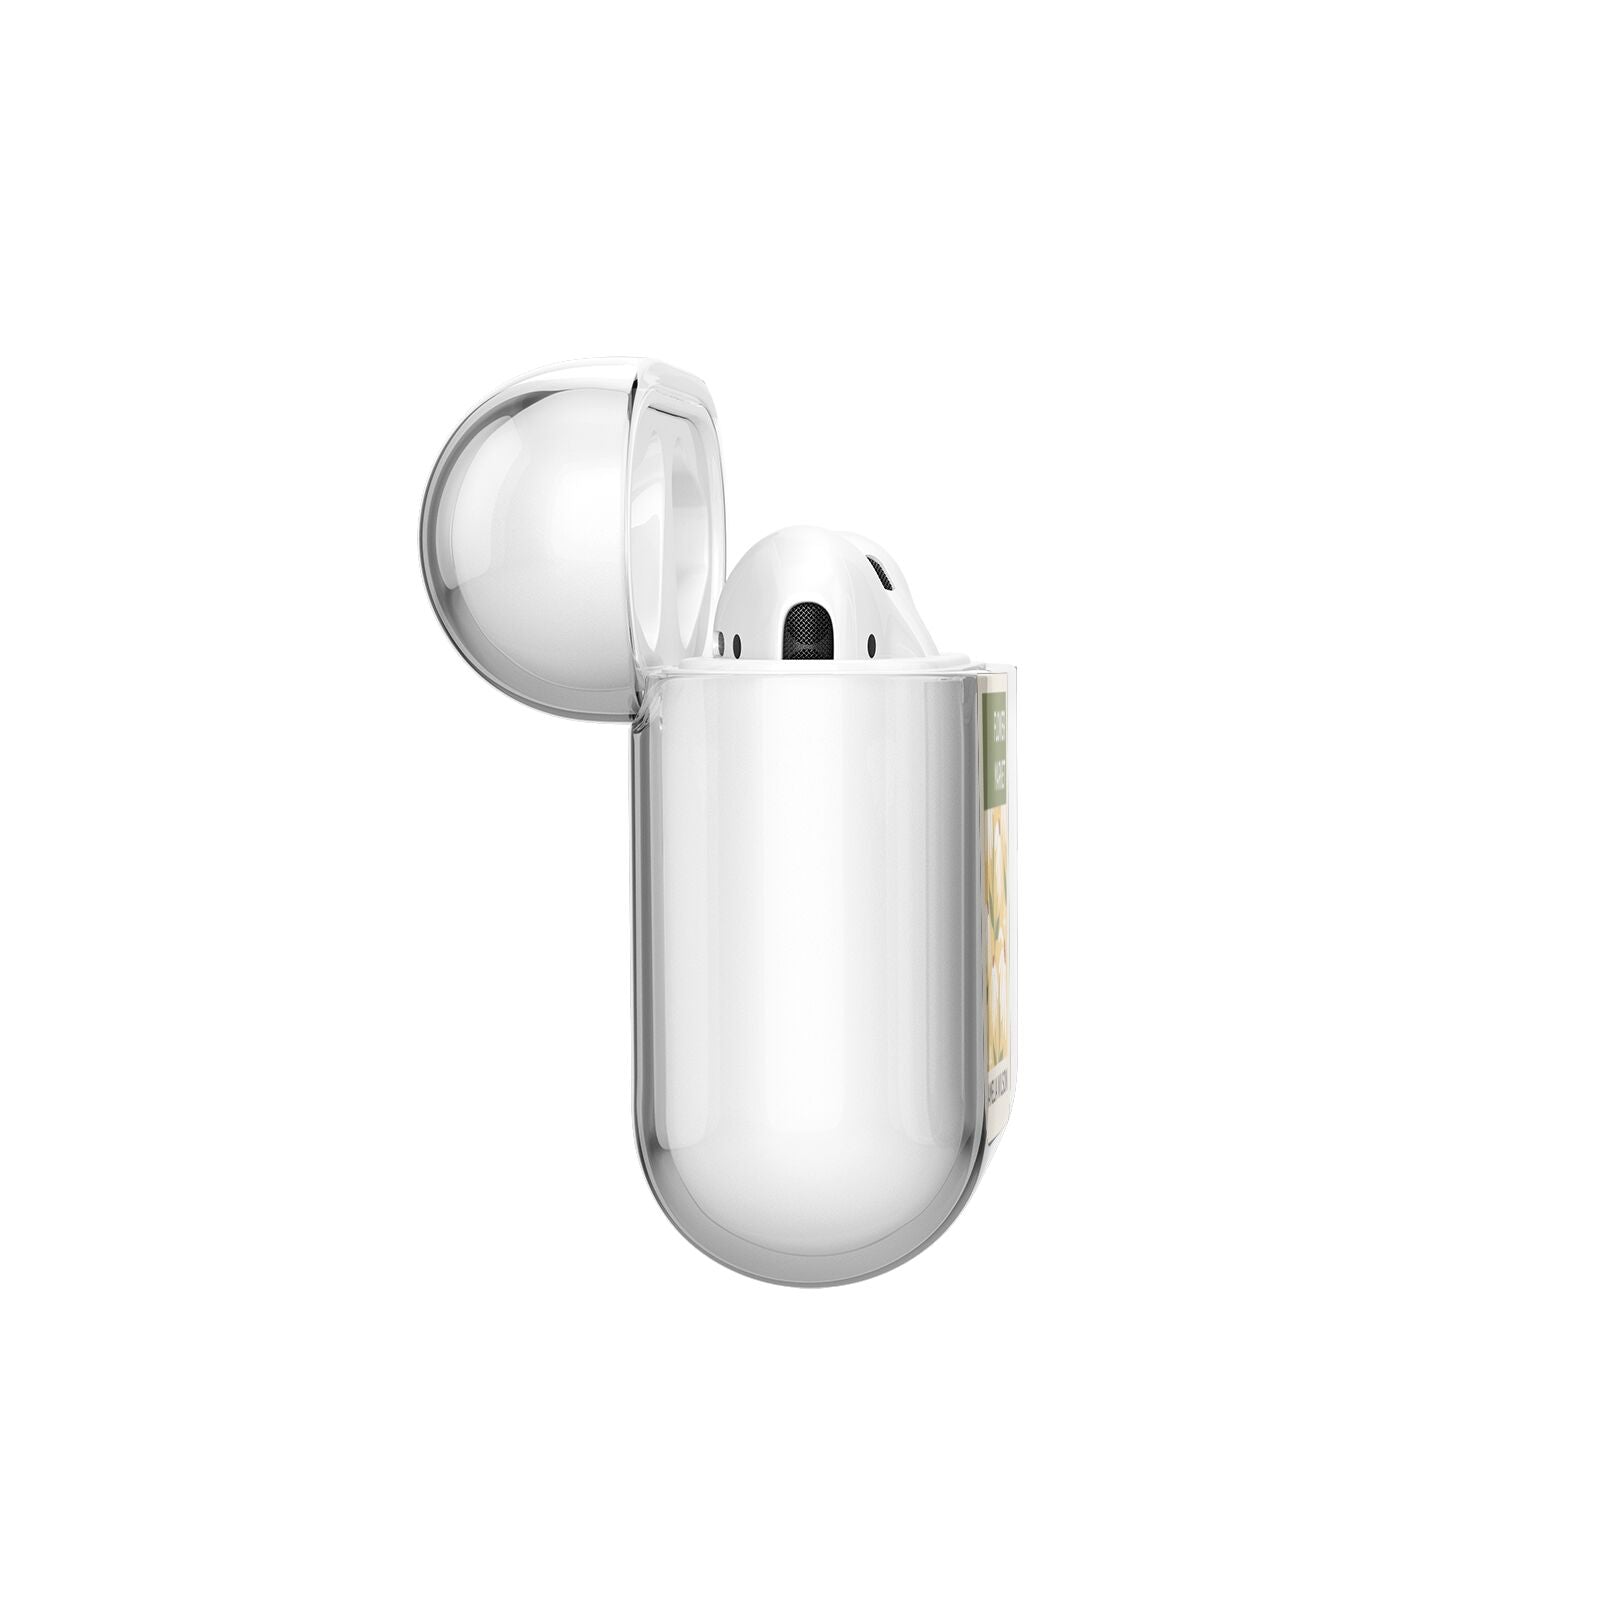 London Flower Market AirPods Case Side Angle